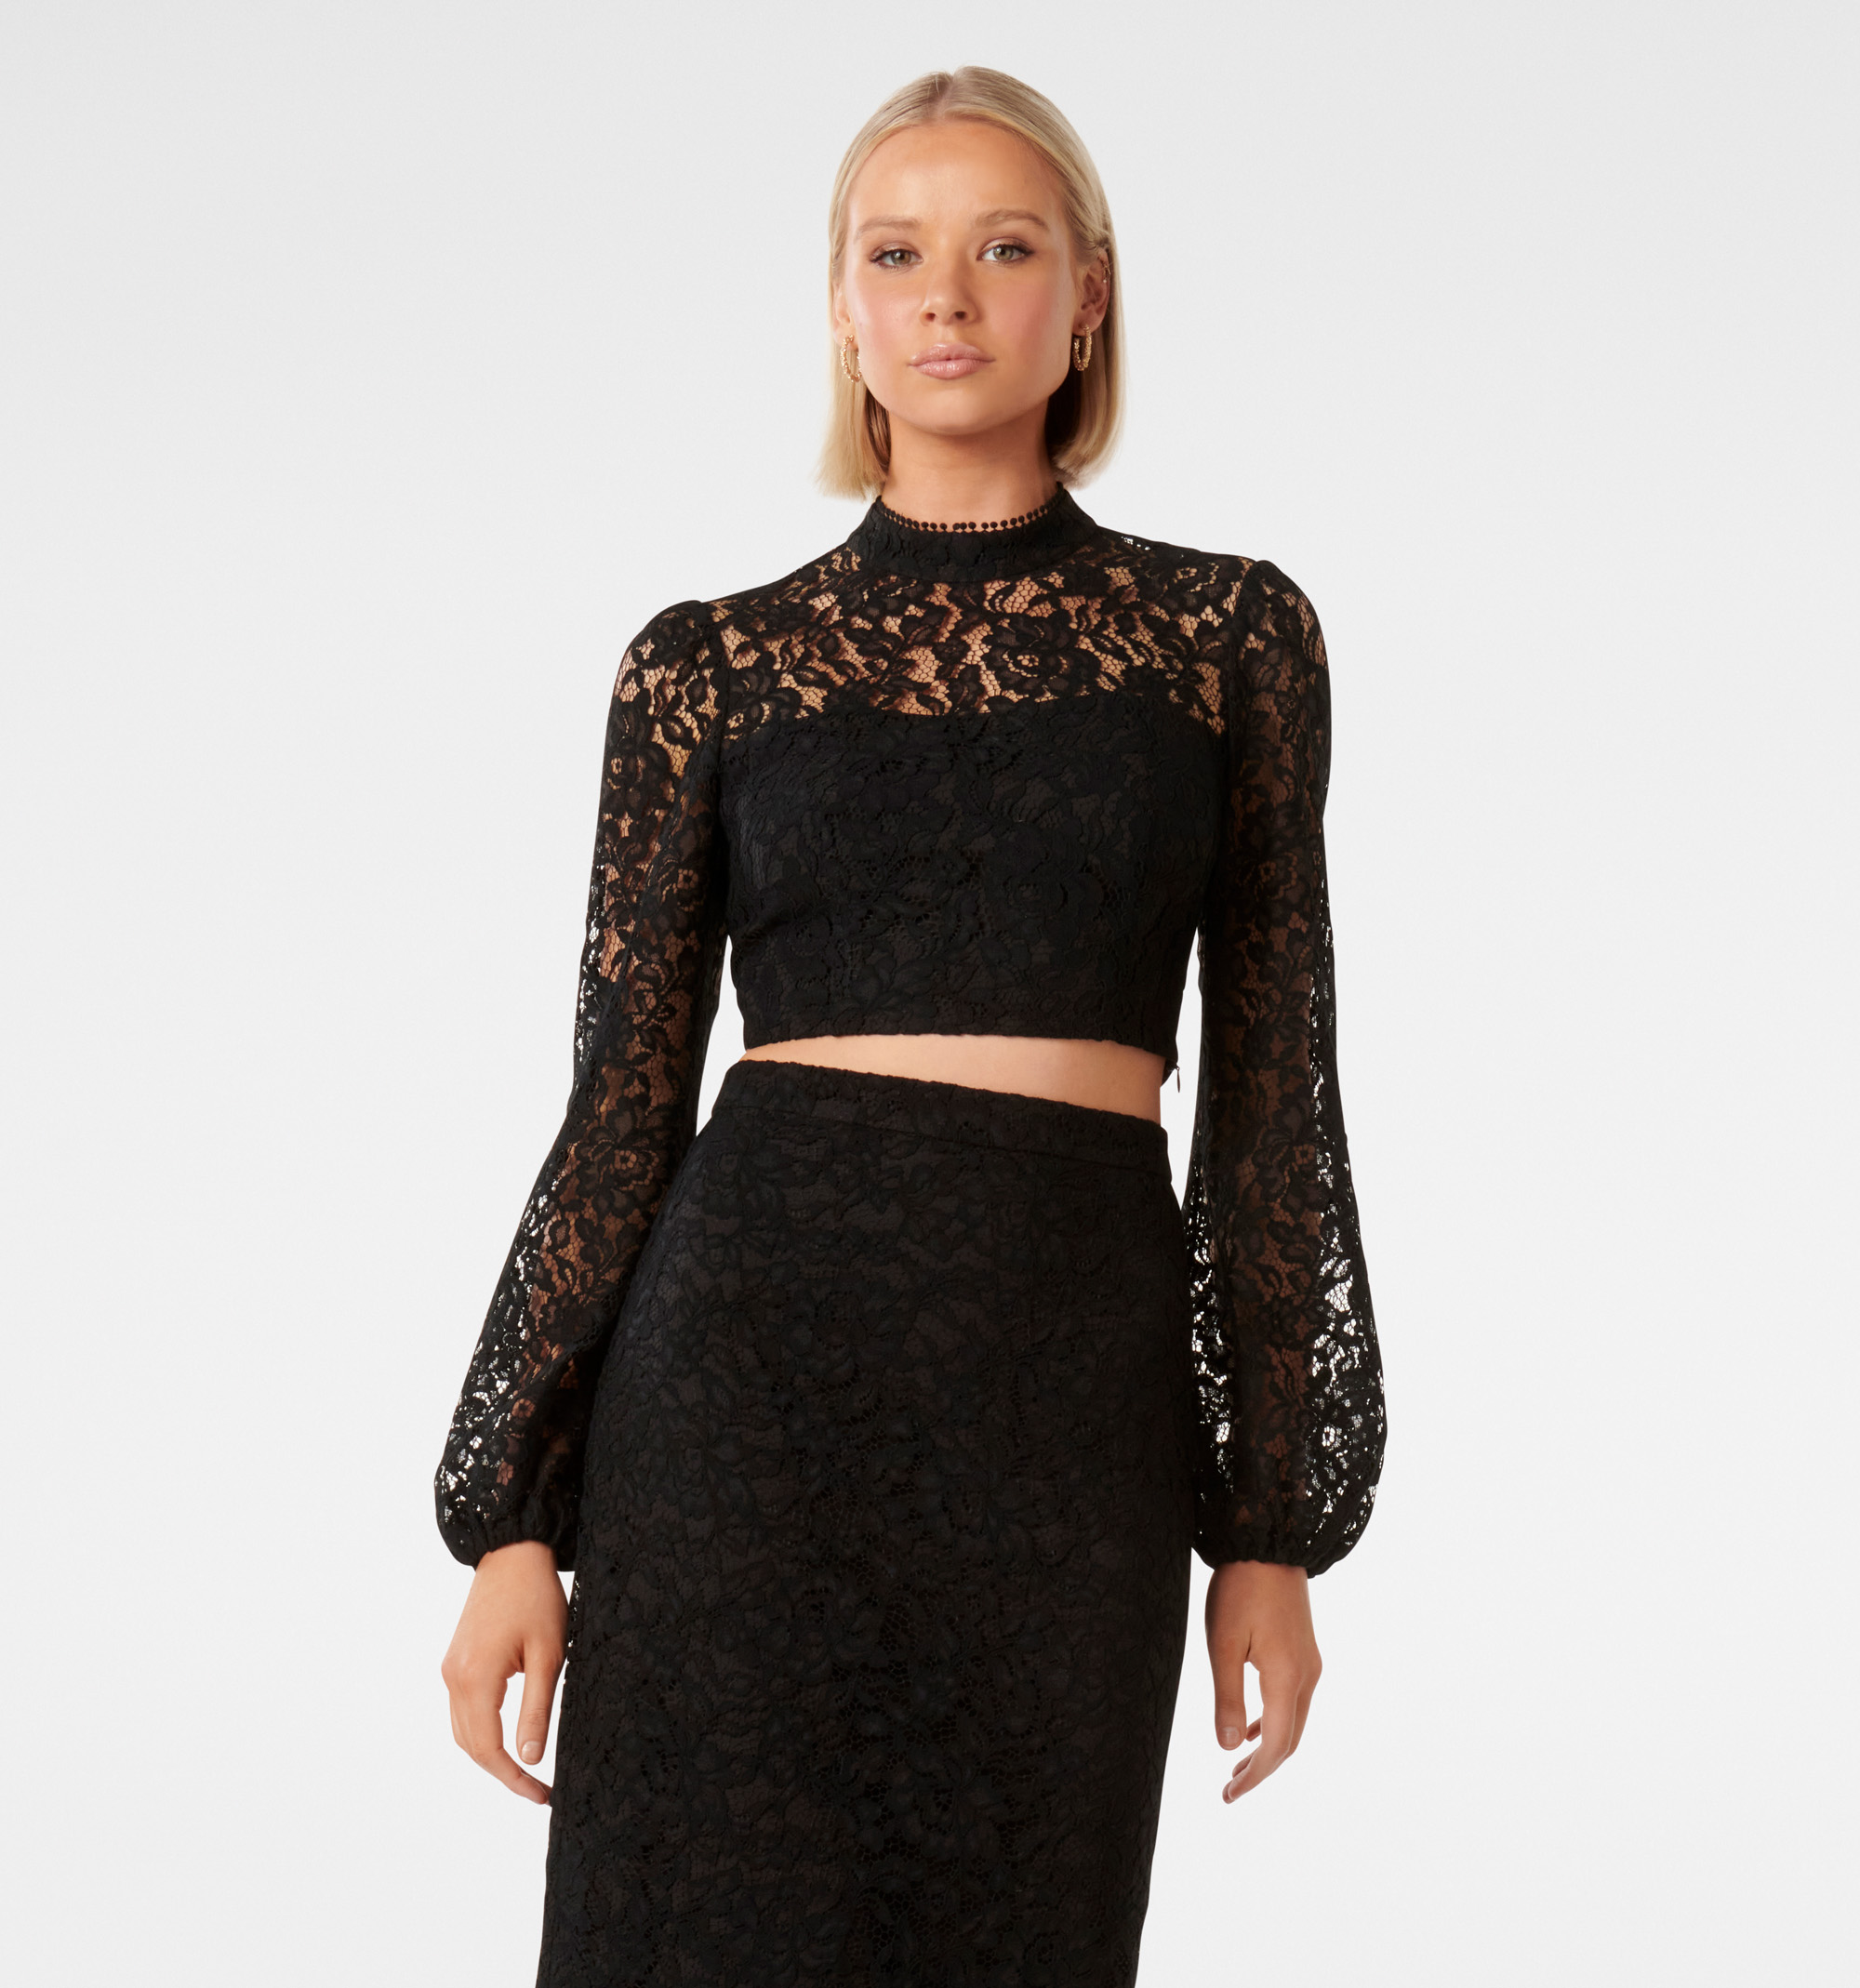 Lucia Open Back Lace Top